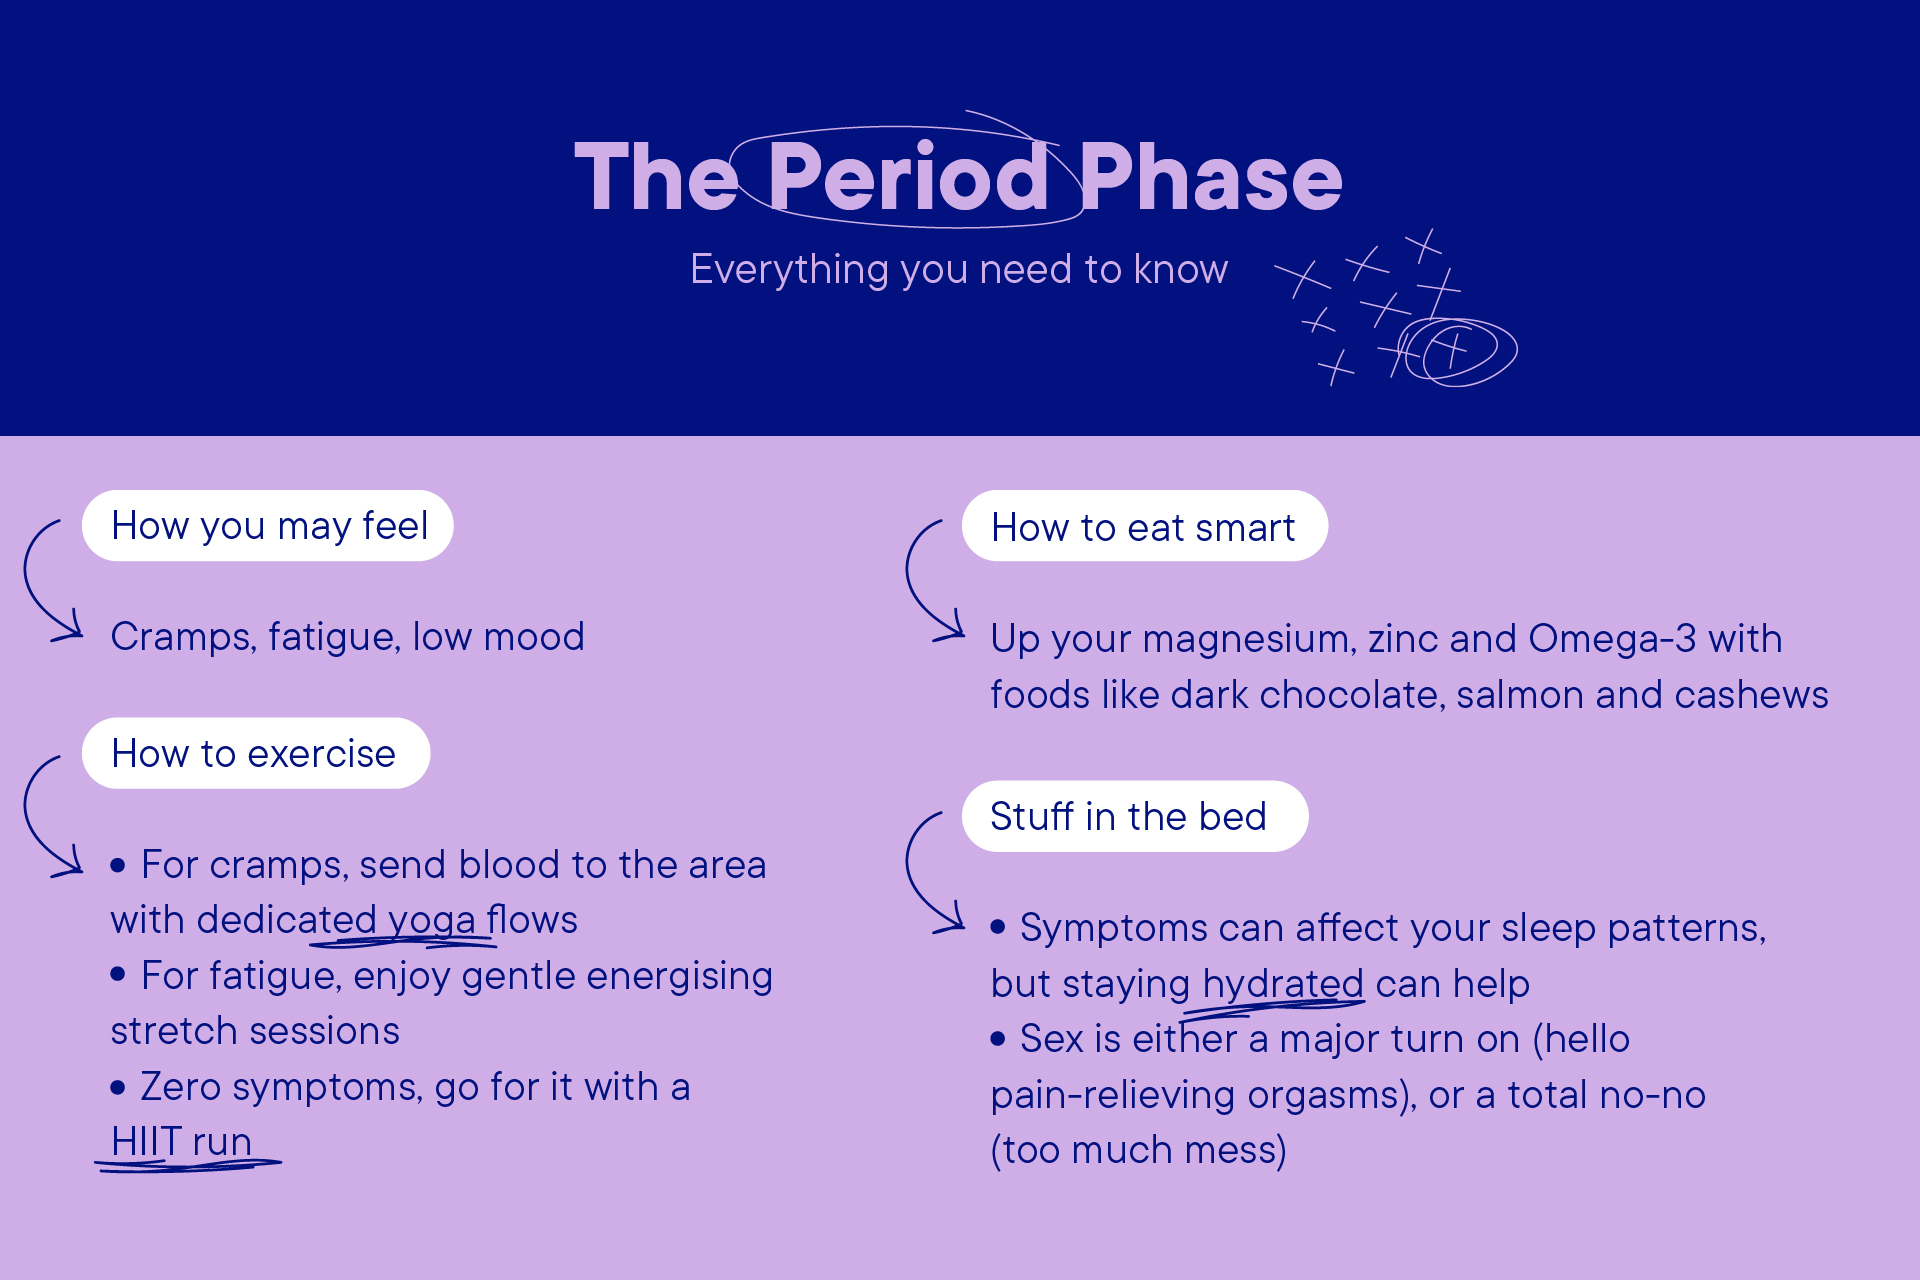 Cycle Syncing Planner & Guide: A Guide to Balanced Living Through Your  Menstrual Phases